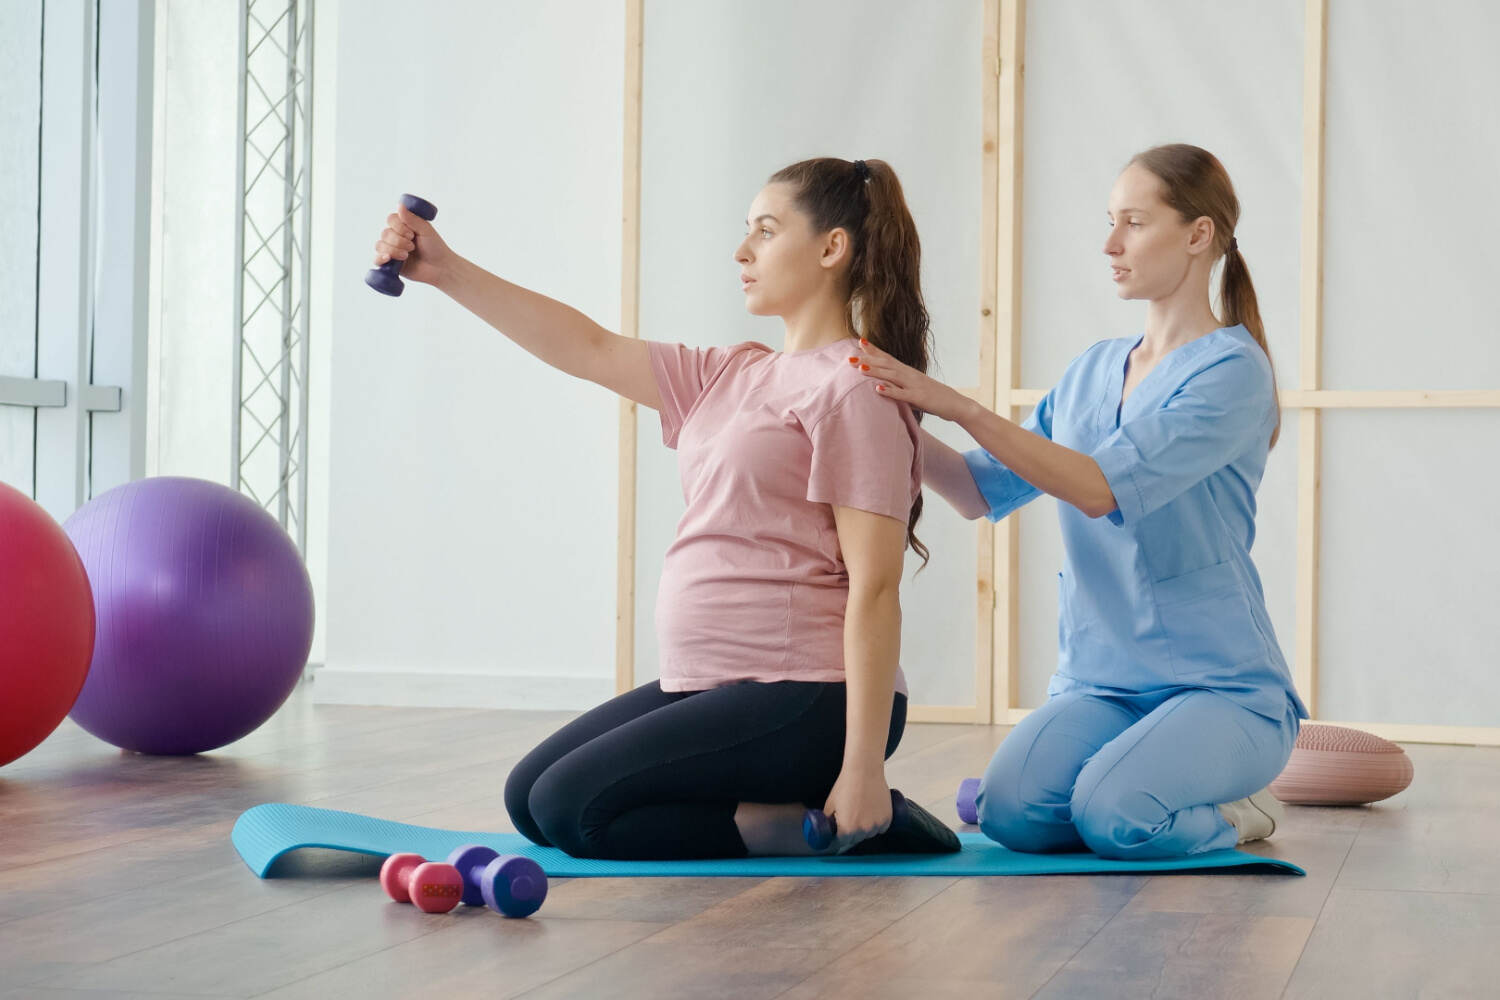 Treatment Options for physiotherapy during pregnancy